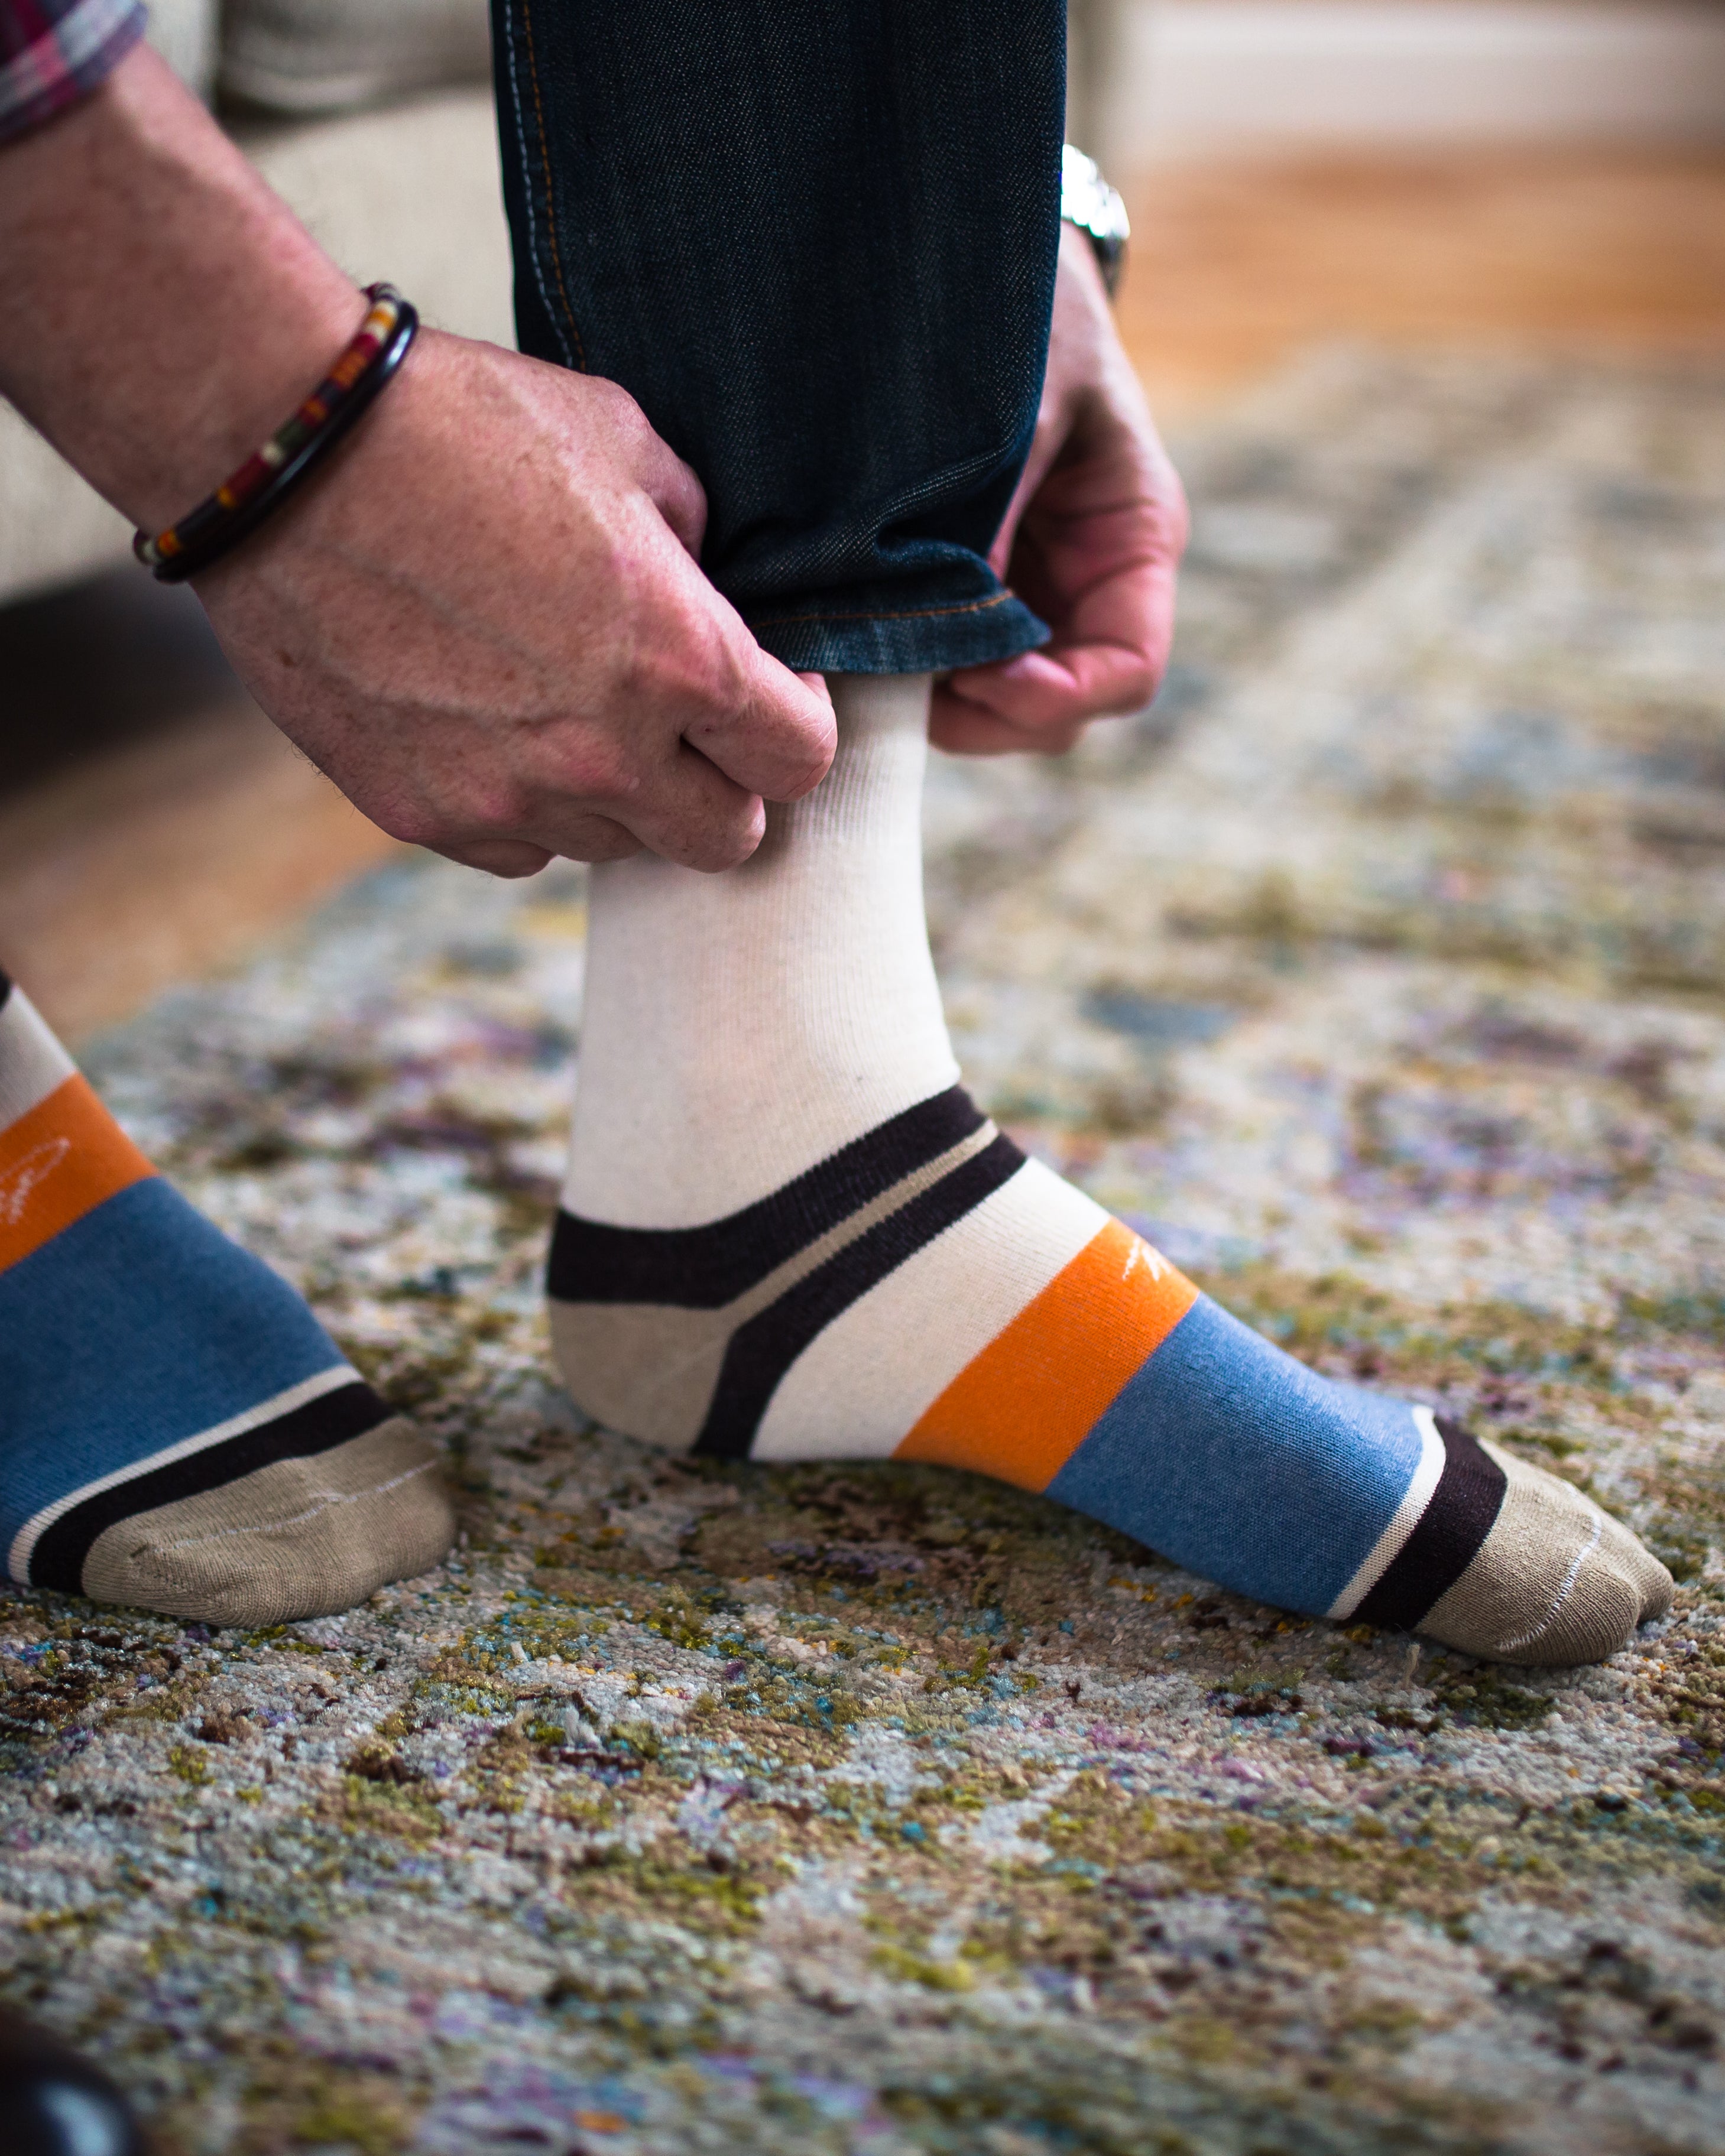 beige over the calf dress socks with orange and light blue stripes on foot and light brown toe and heel, dark blue jeans